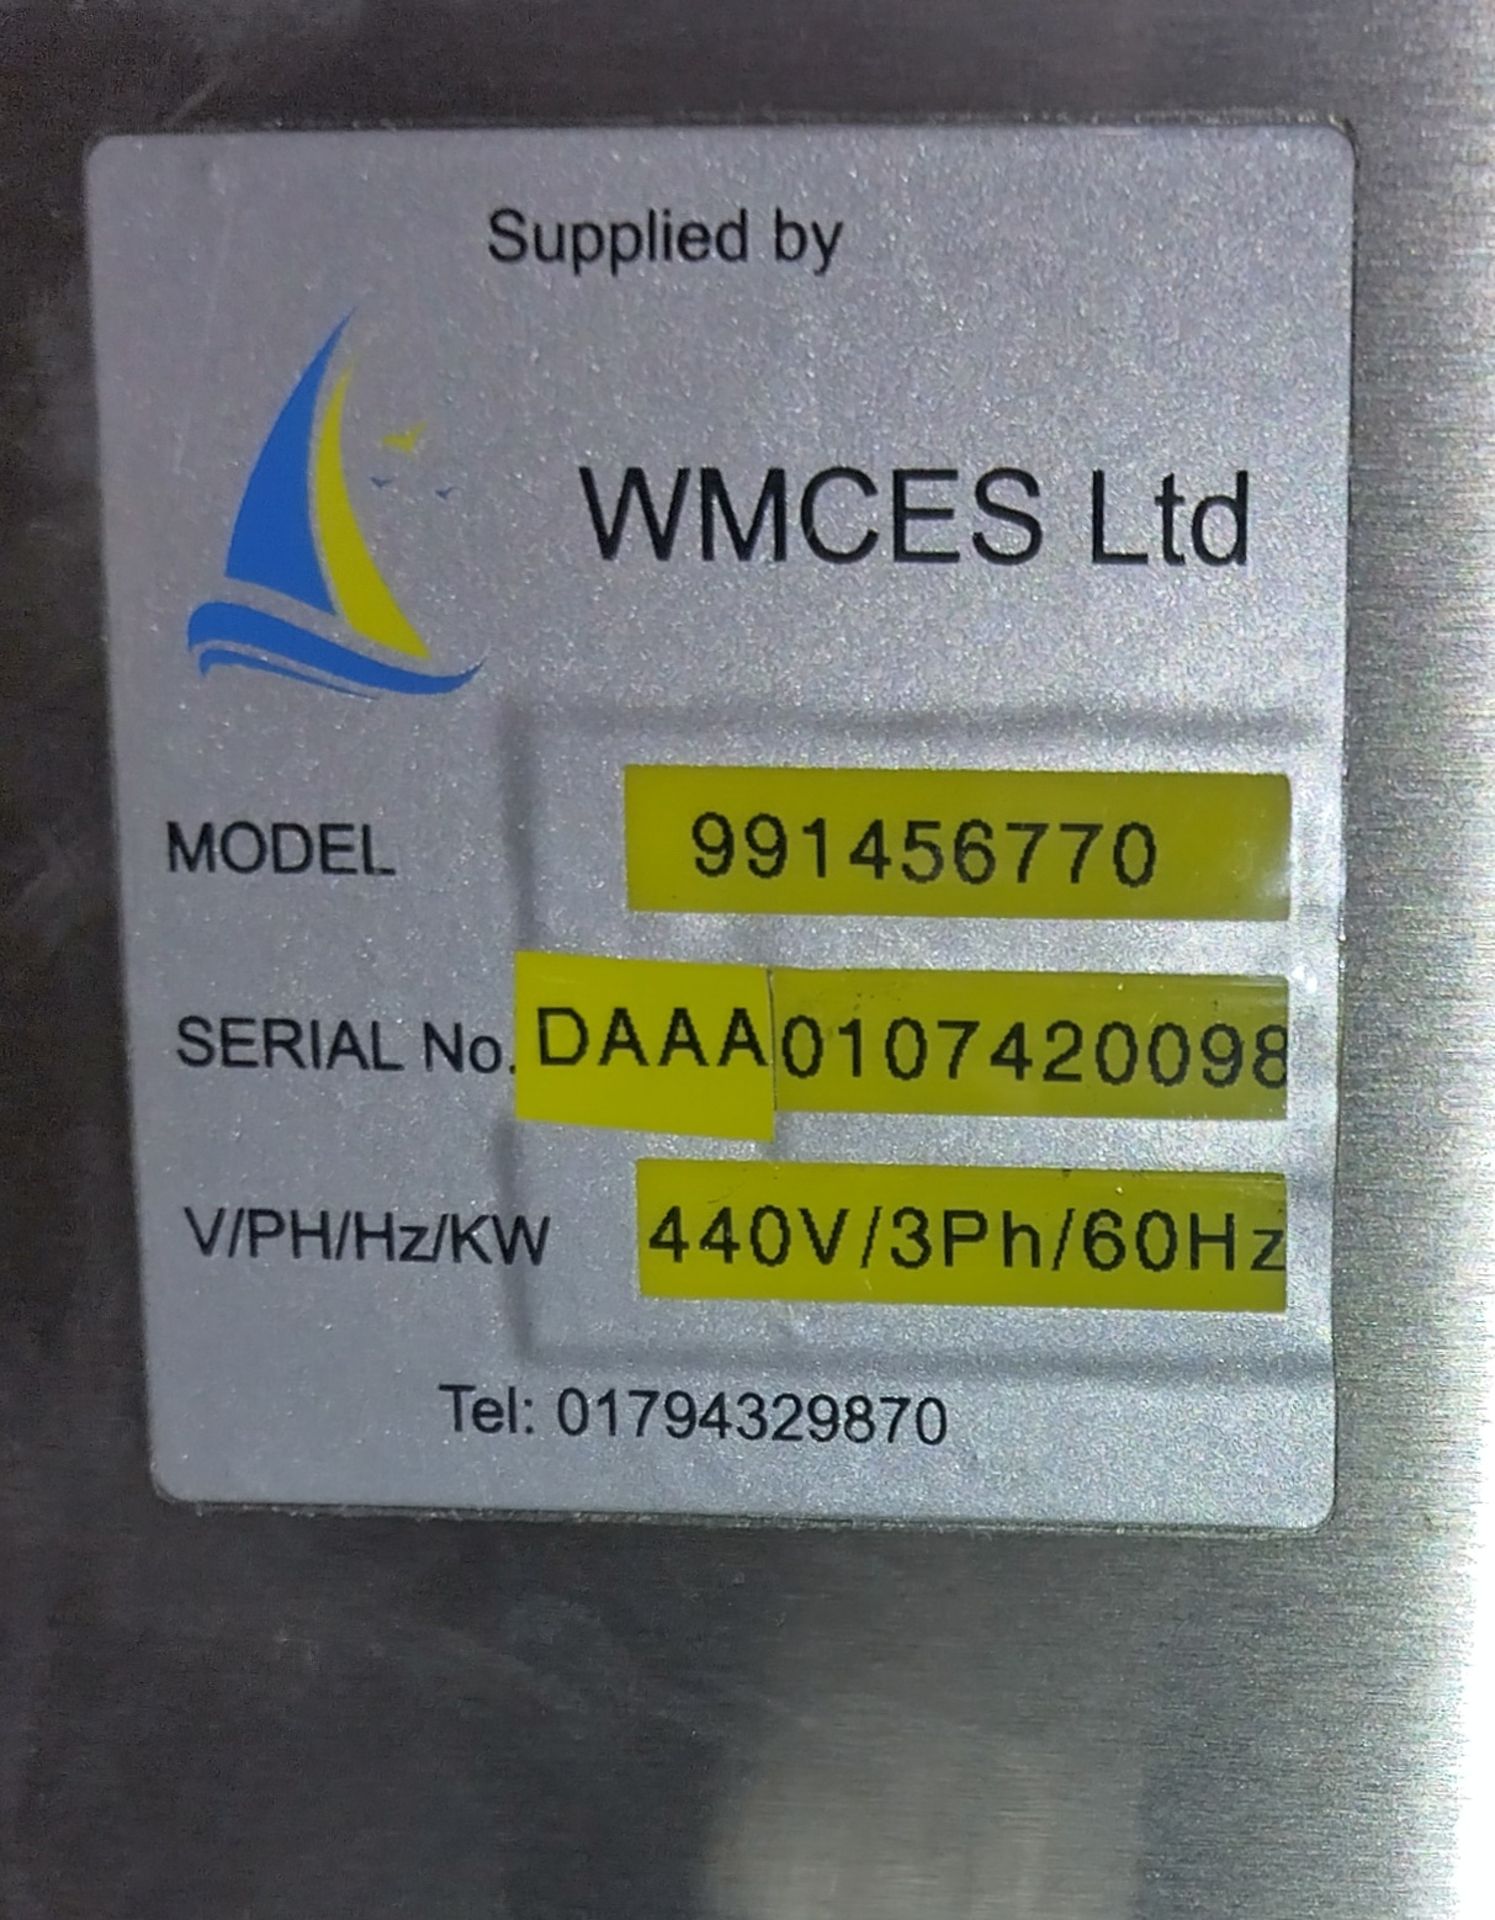 Wathen Marine Catering Equipment Services (WMCES) JEM-30 stainless steel water boiler - W 280 - Image 4 of 4